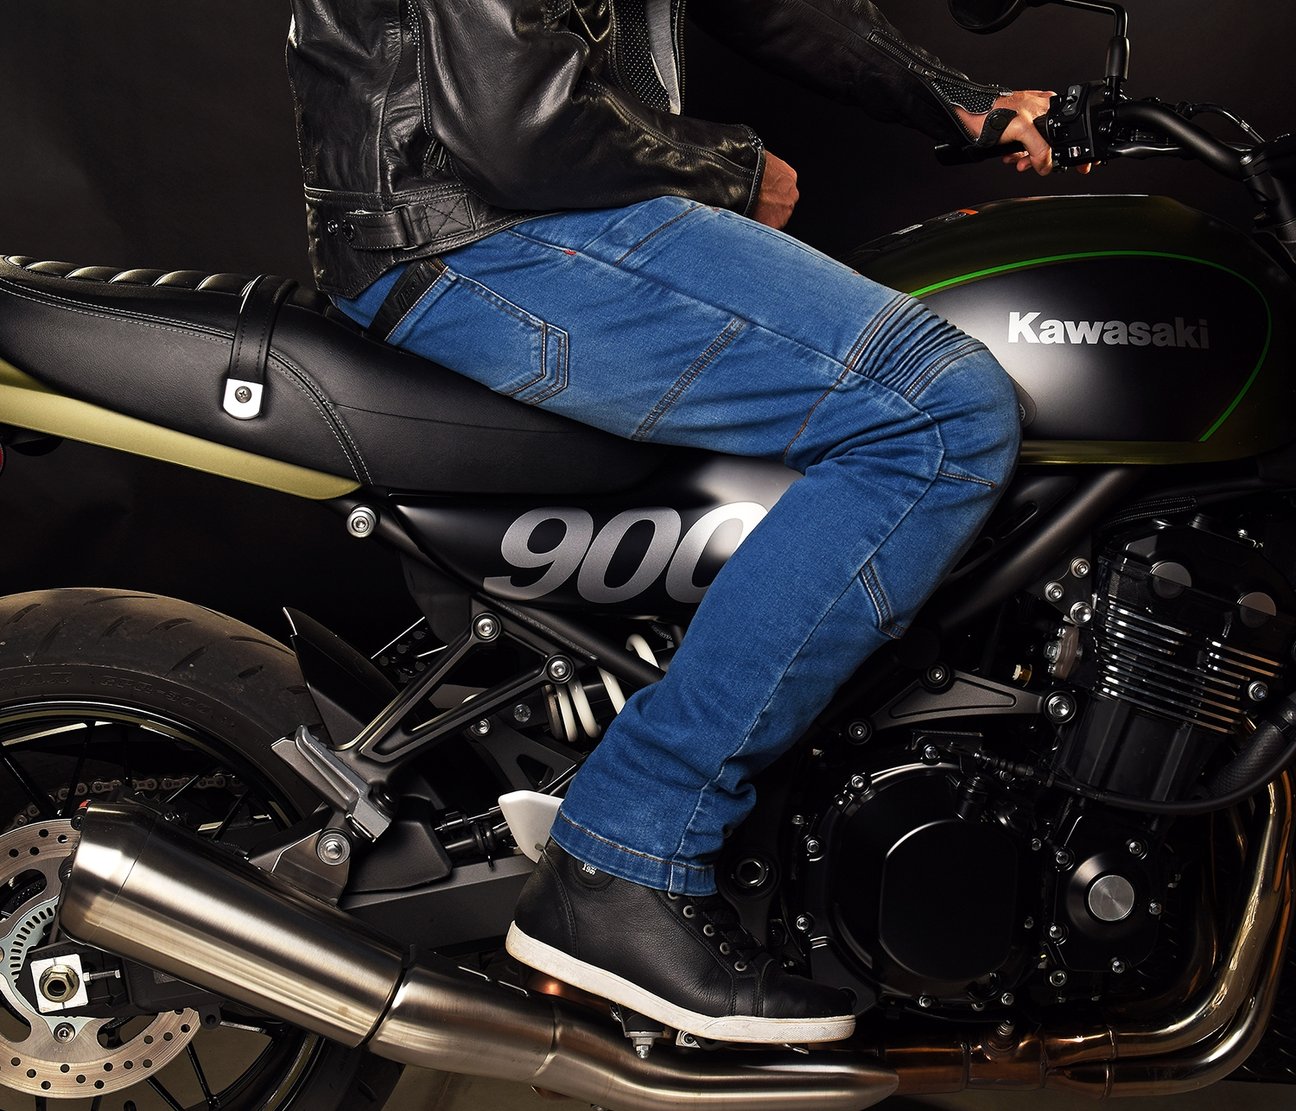 Motorcycle Jeans